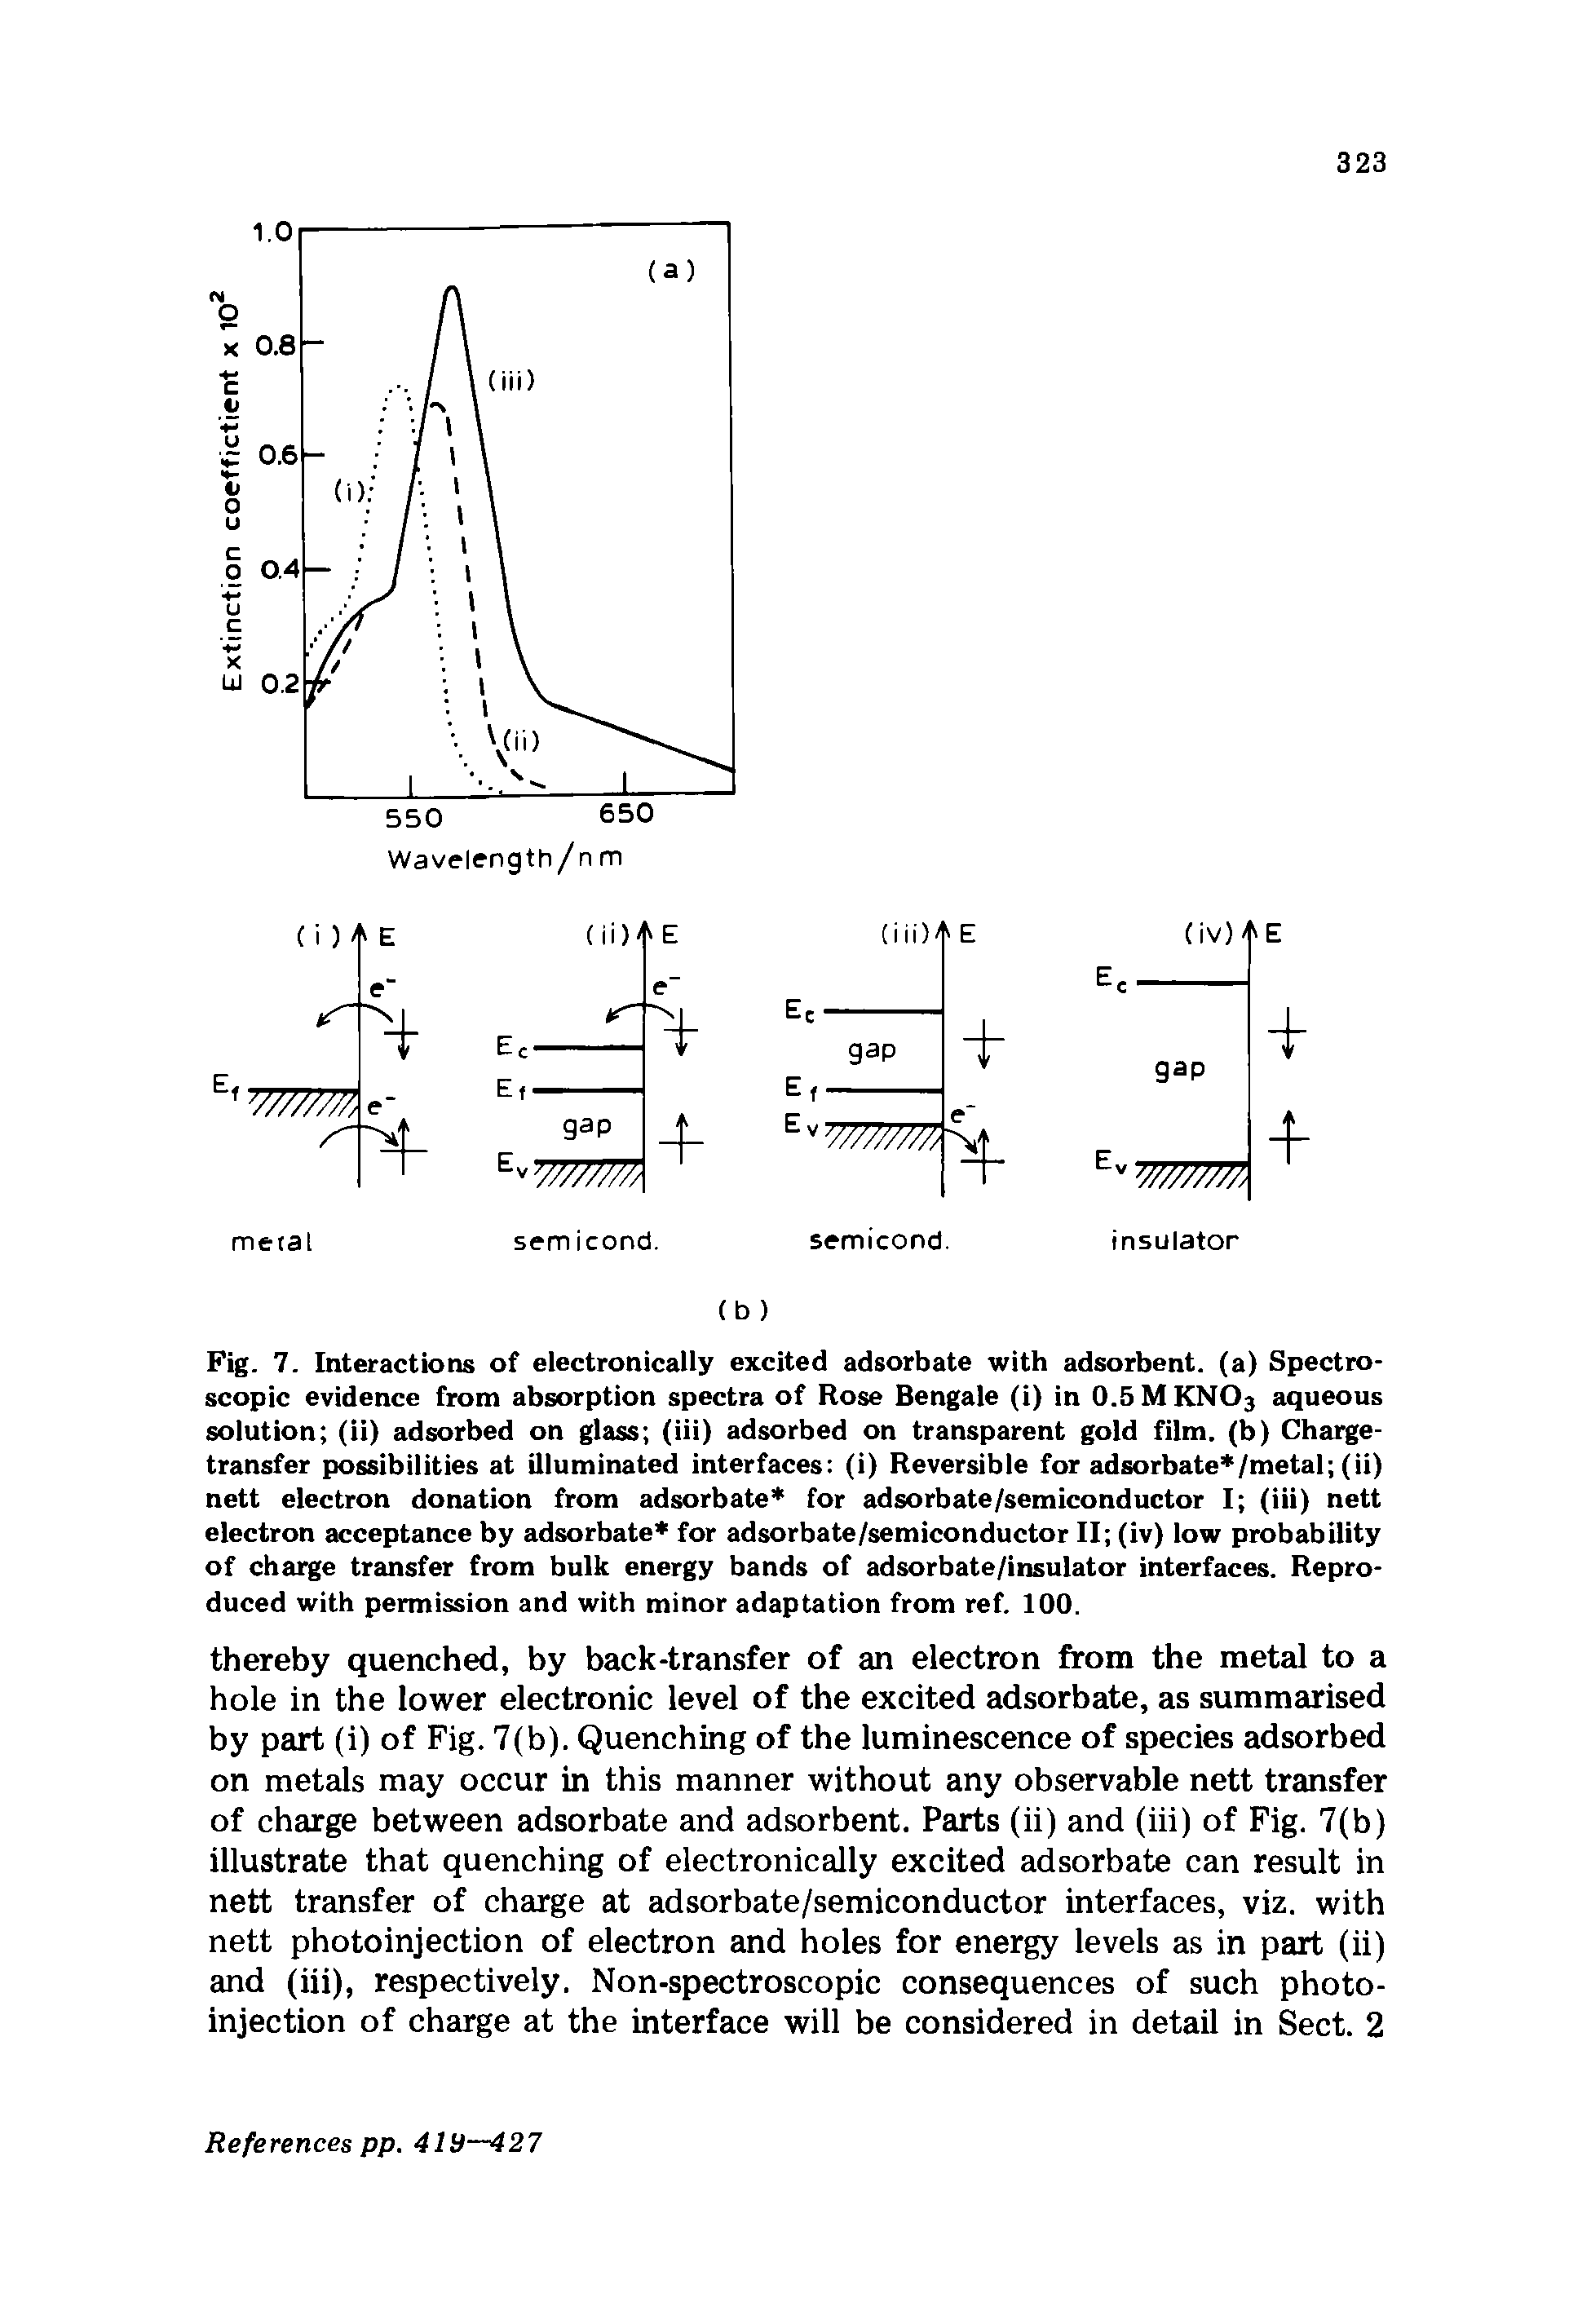 Fig. 7. Interactions of electronically excited adsorbate with adsorbent, (a) Spectroscopic evidence from absorption spectra of Rose Bengale (i) in 0.5 M KN03 aqueous solution (ii) adsorbed on glass (iii) adsorbed on transparent gold film, (b) Charge-transfer possibilities at illuminated interfaces (i) Reversible for adsorbate /metal (ii) nett electron donation from adsorbate for adsorbate/semiconductor I (iii) nett electron acceptance by adsorbate for adsorbate/semiconductor II (iv) low probability of charge transfer from bulk energy bands of adsorbate/insulator interfaces. Reproduced with permission and with minor adaptation from ref. 100.